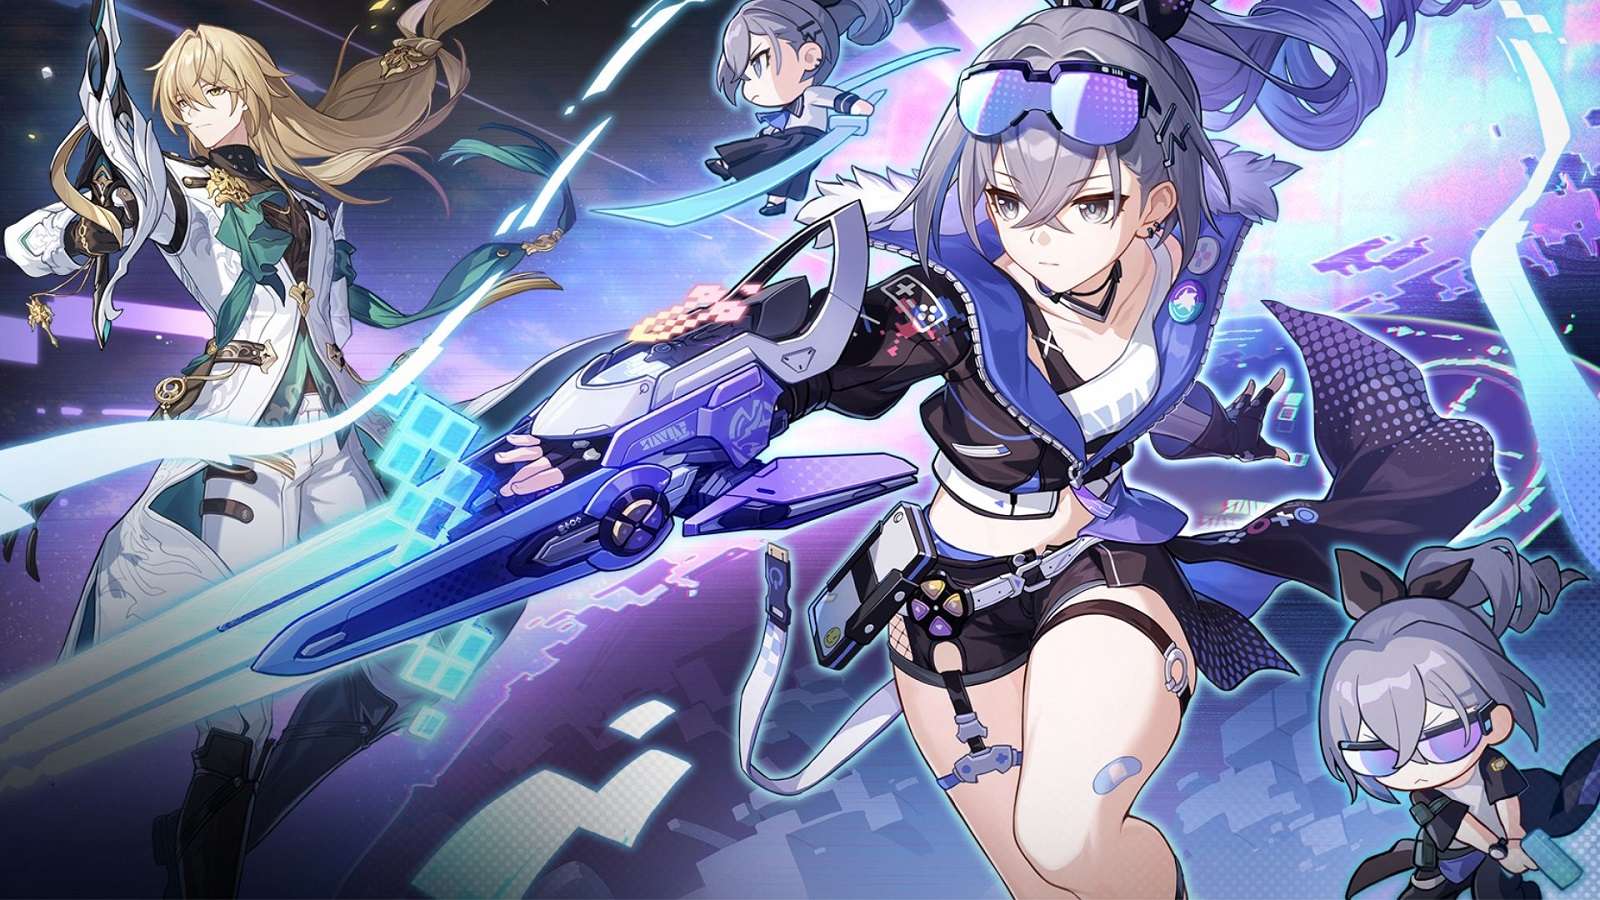 Silver Wolf using her ability in Honkai Star Rail